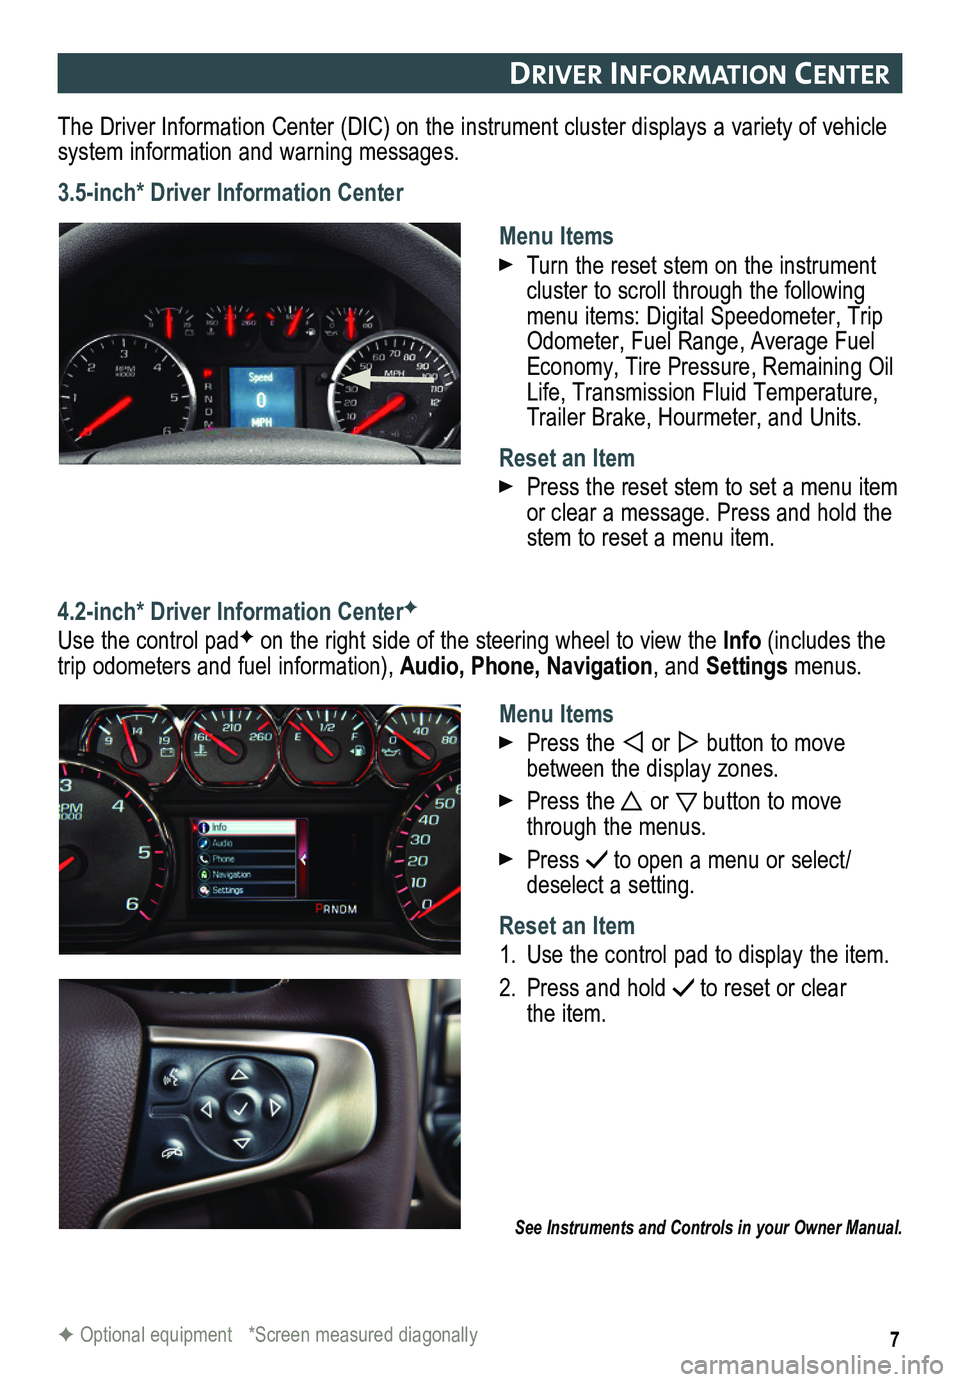 GMC SIERRA HD 2015  Get To Know Guide 7
DrIver In Format Ion center
The Driver Information Center (DIC) on the instrument cluster displays a variety of vehicle system information and warning messages.
3.5-inch* Driver Information Center
M